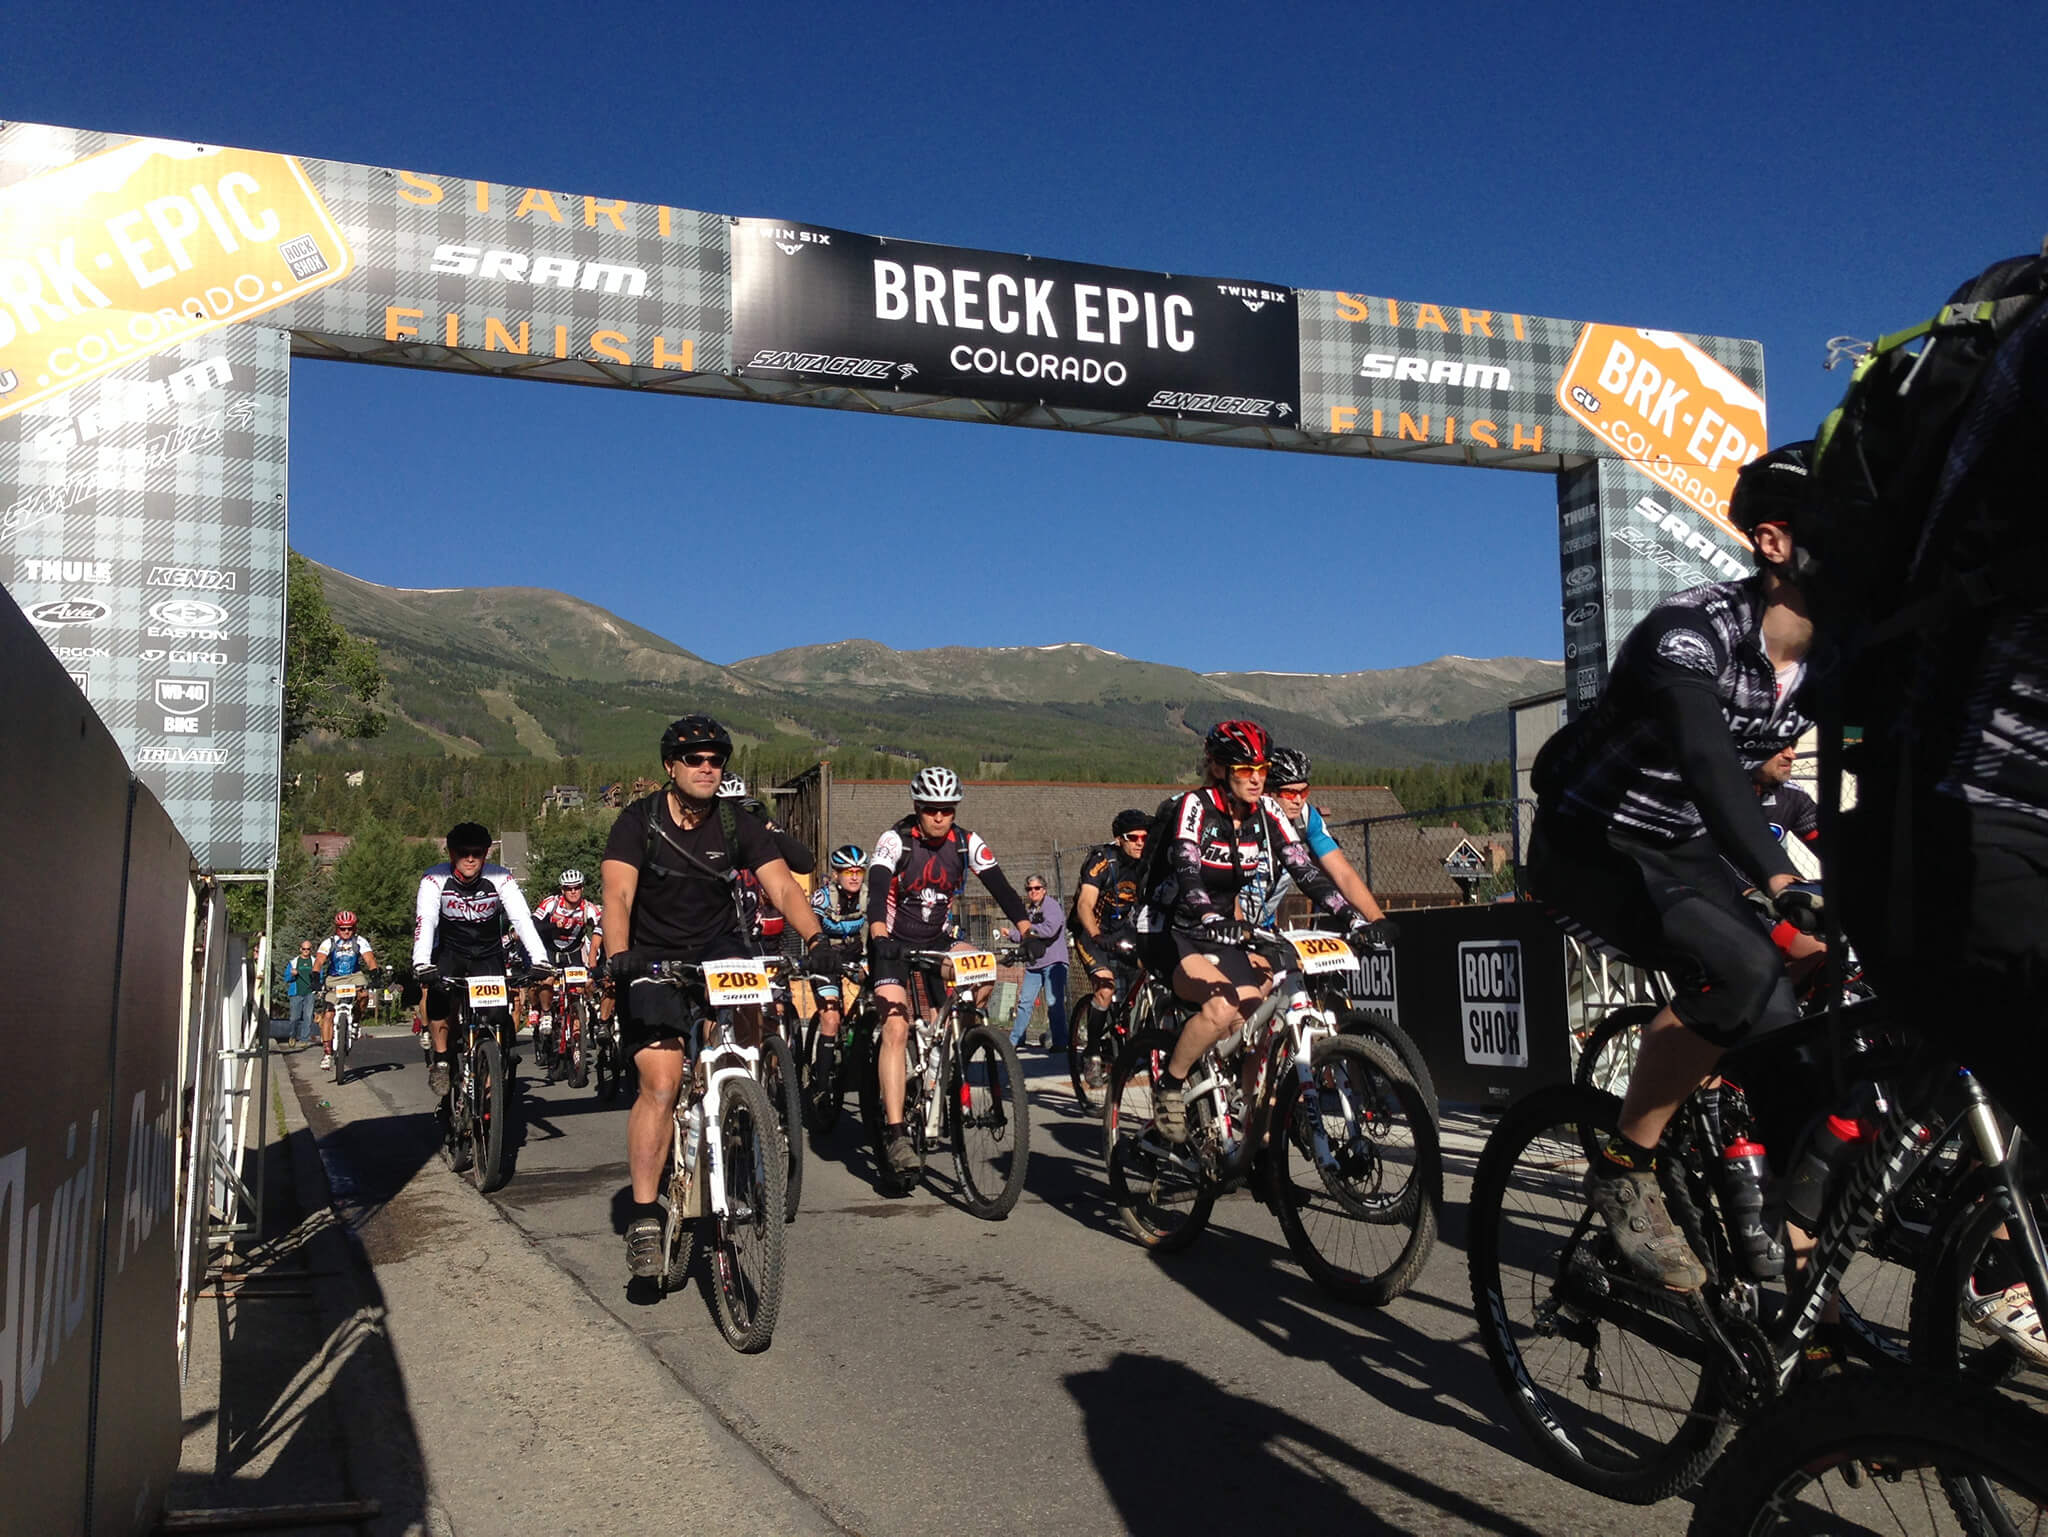 Breck Epic is one of the most demanding races in Breckenridge.